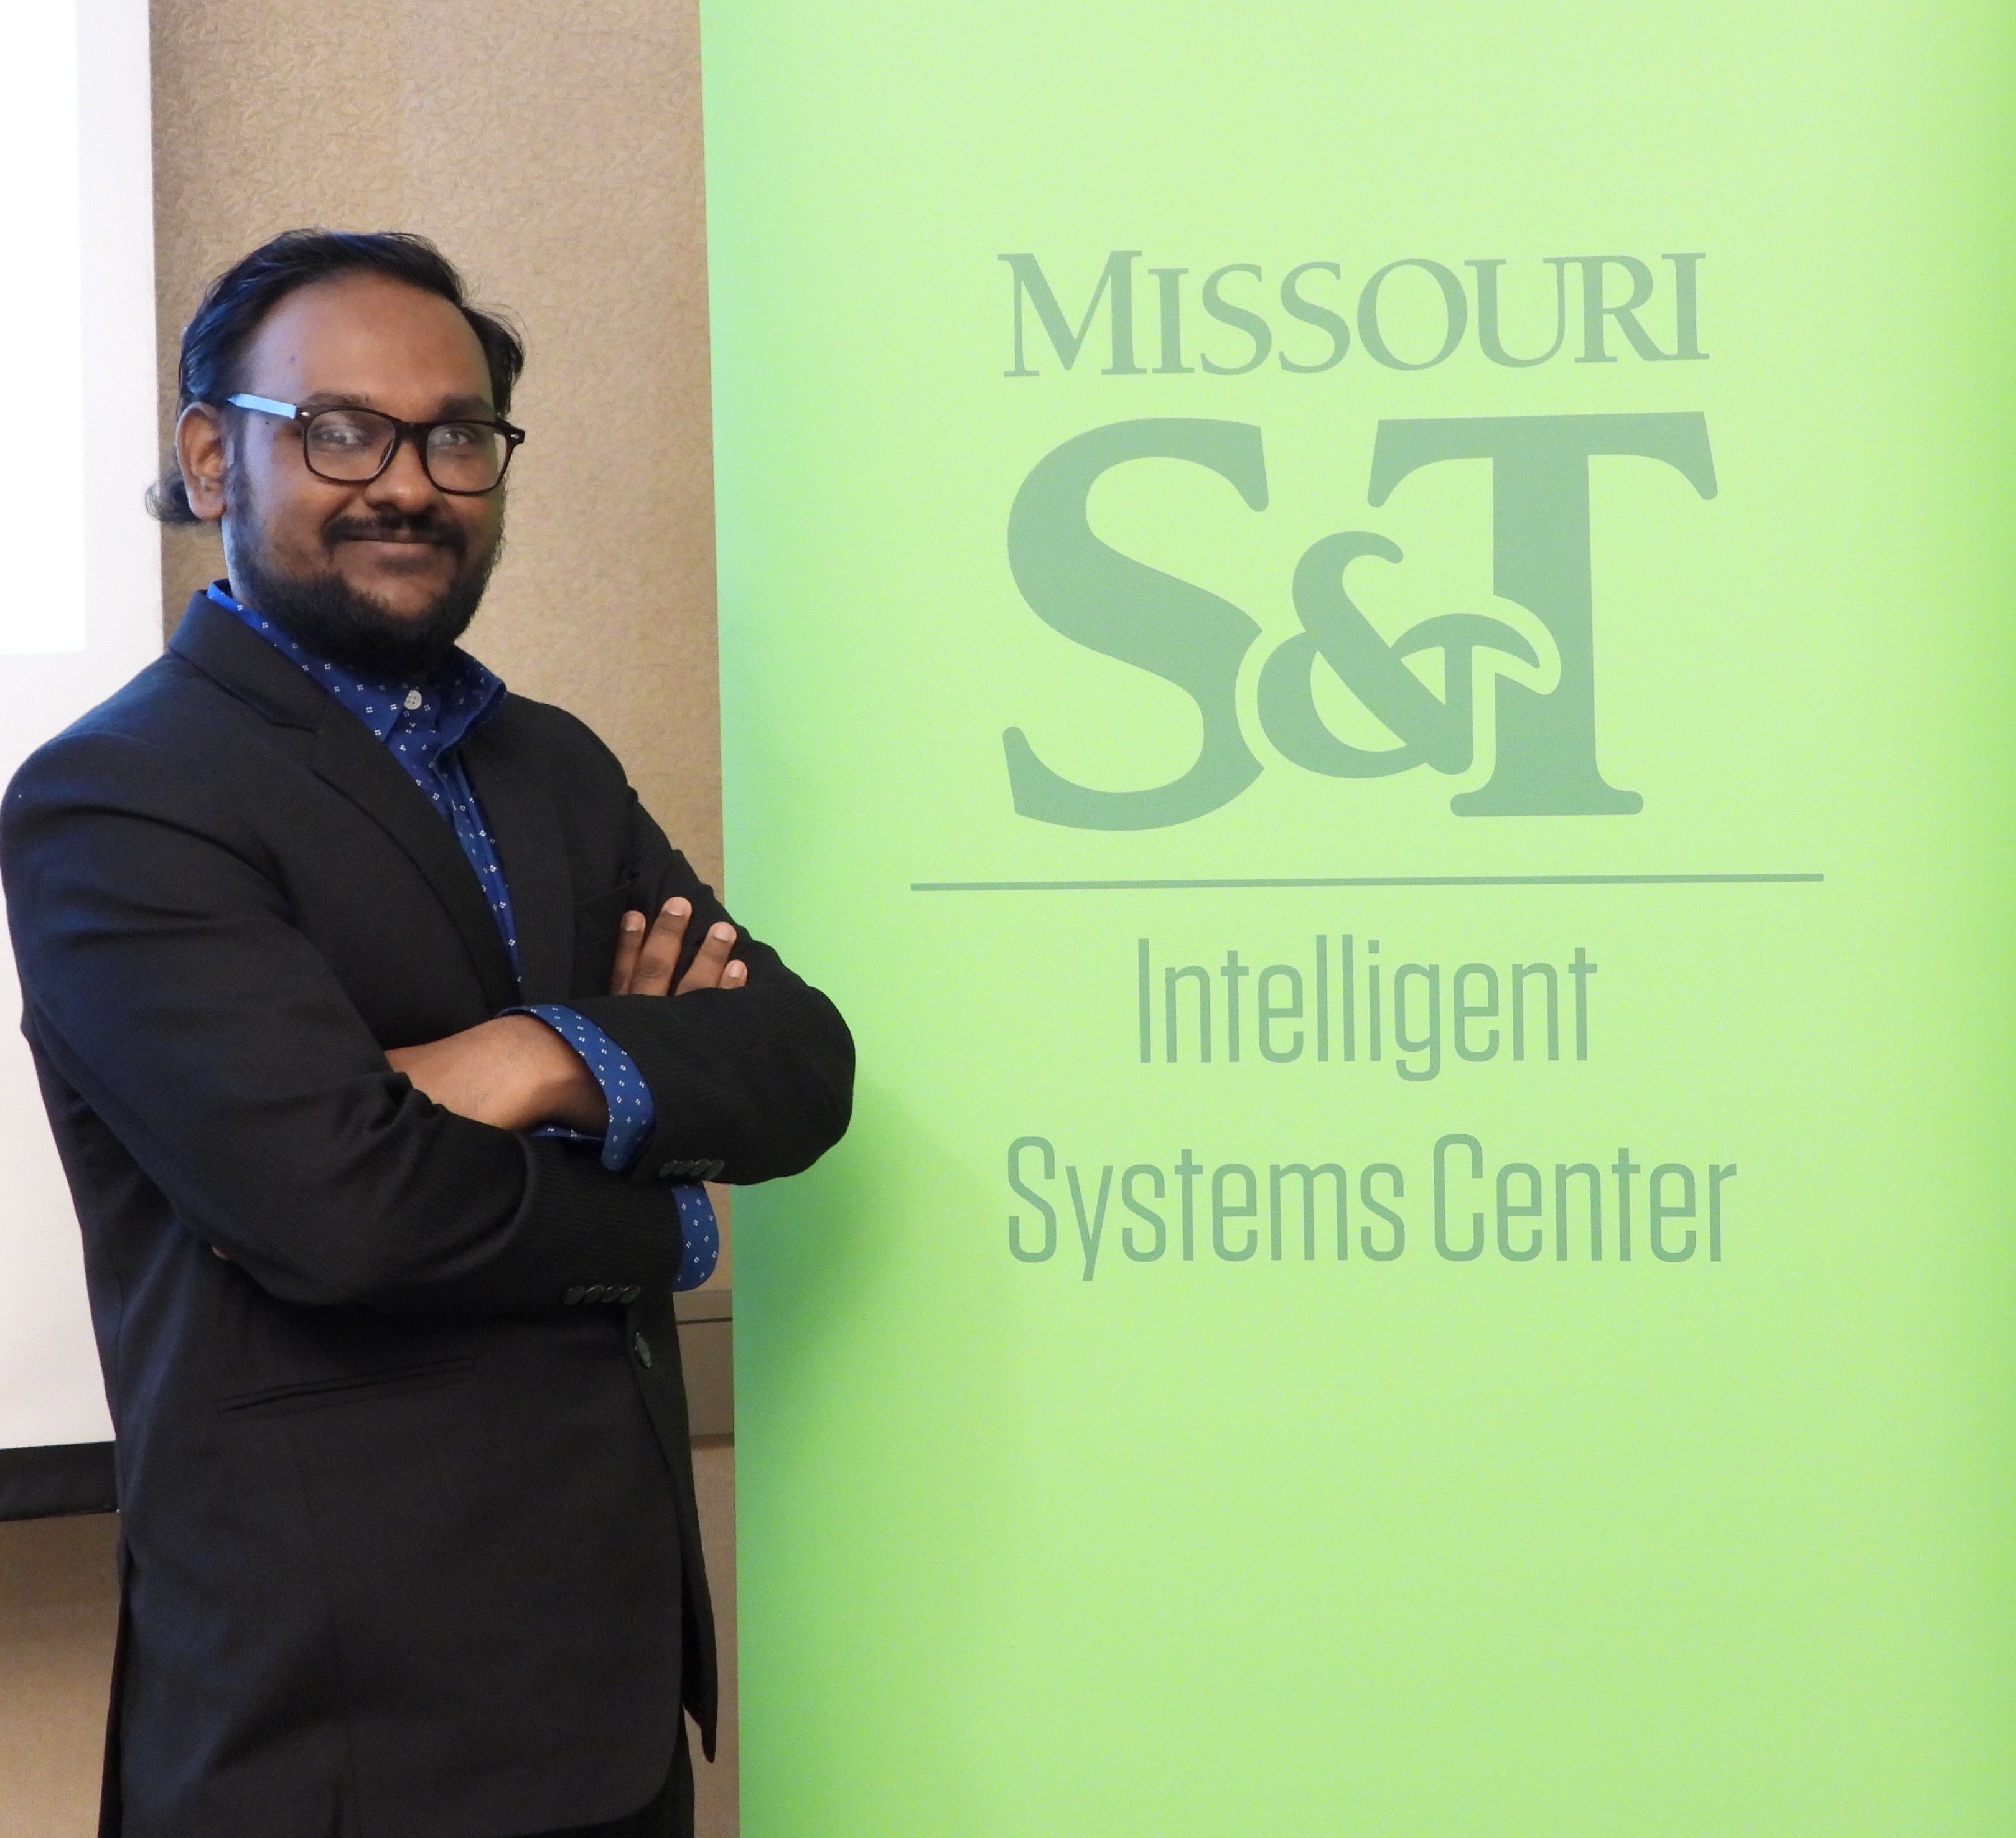 Third place recipient, Tazdik Patwary Plateau, smiling in front of Intelligent Systems Center banner.